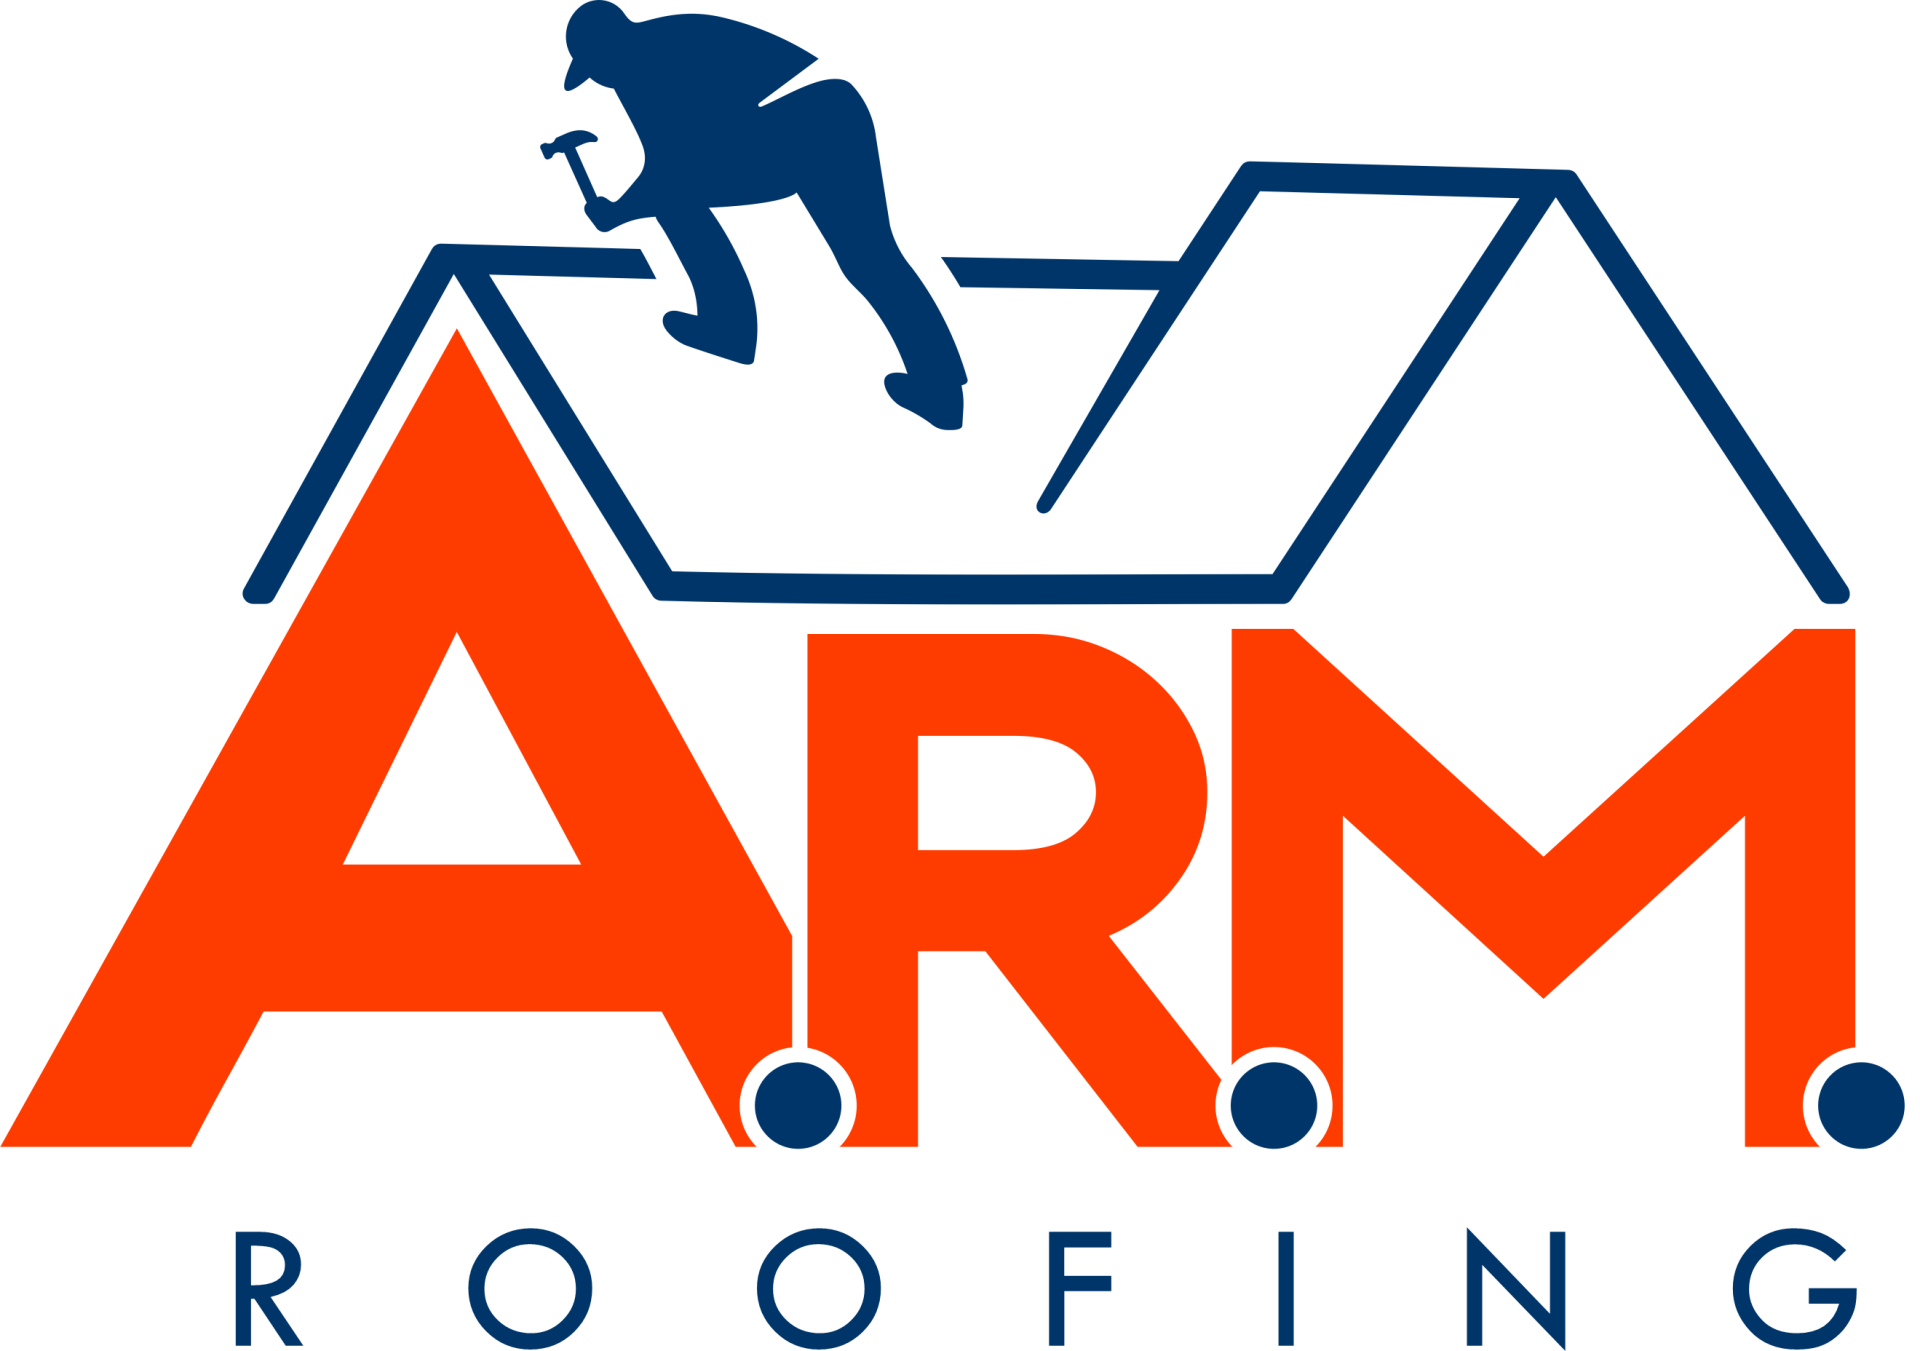 Roofing Services in Hanover PA | Bealing Roofing & Exterior